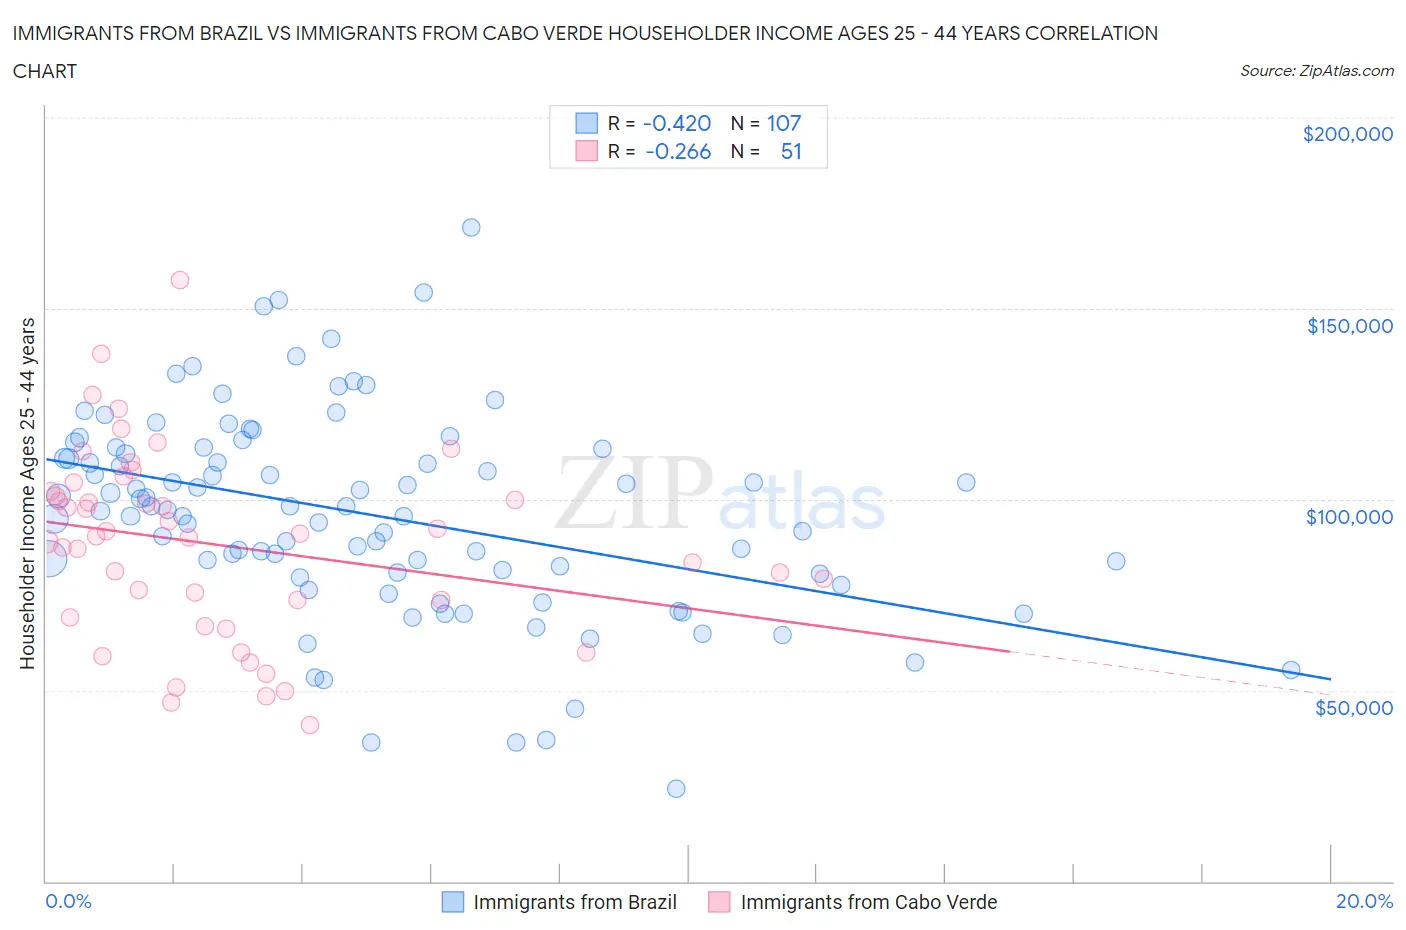 Immigrants from Brazil vs Immigrants from Cabo Verde Householder Income Ages 25 - 44 years